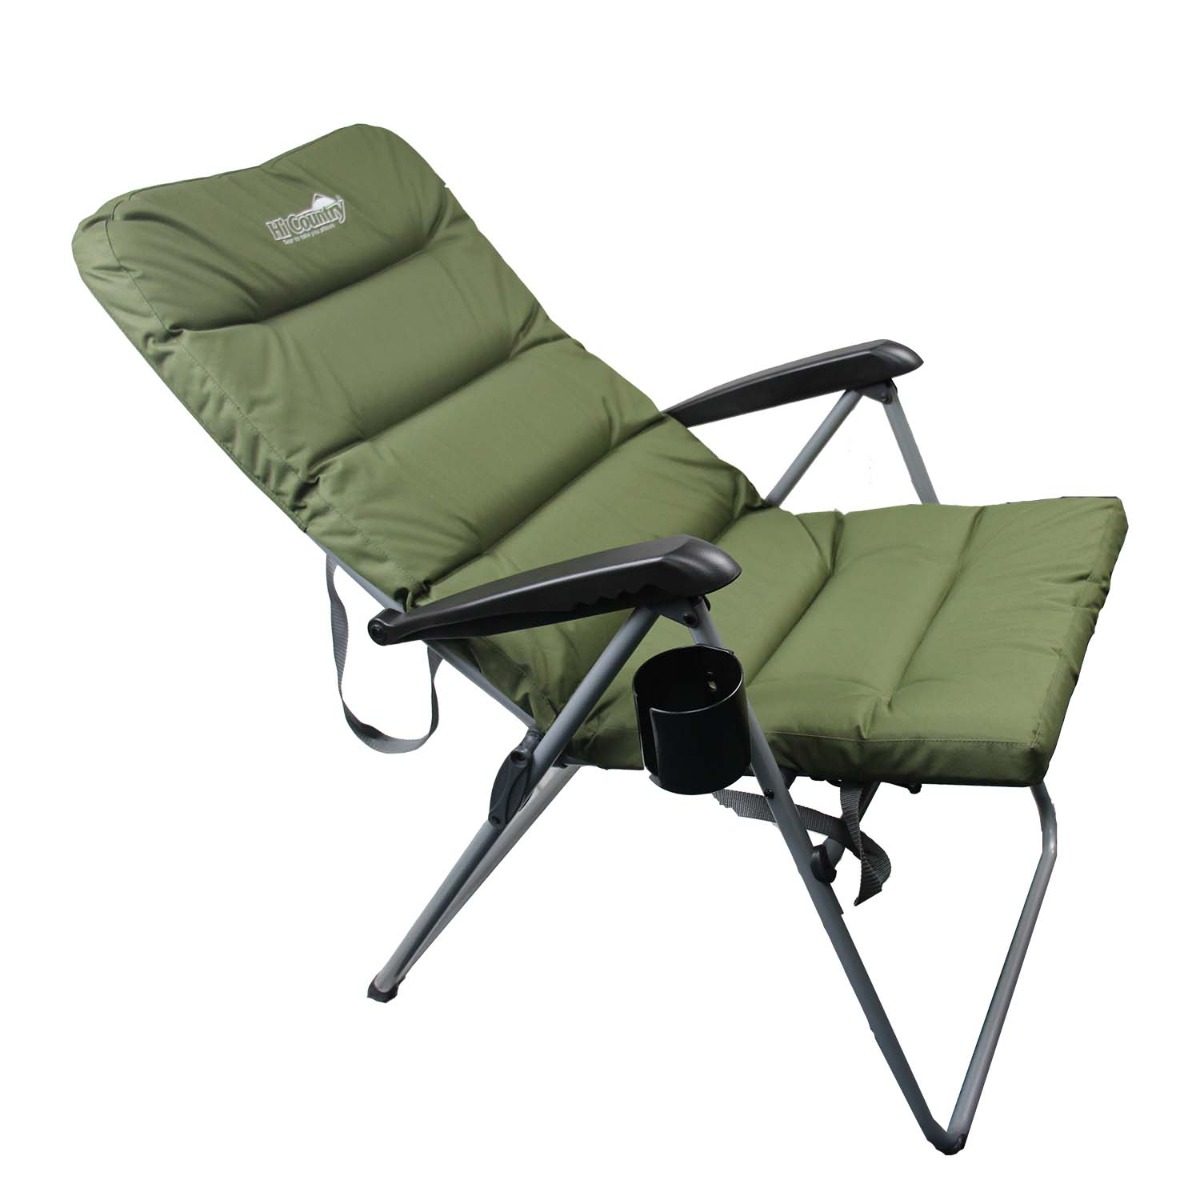 HI-COUNTRY HAYMAN 5 POSITION CHAIR